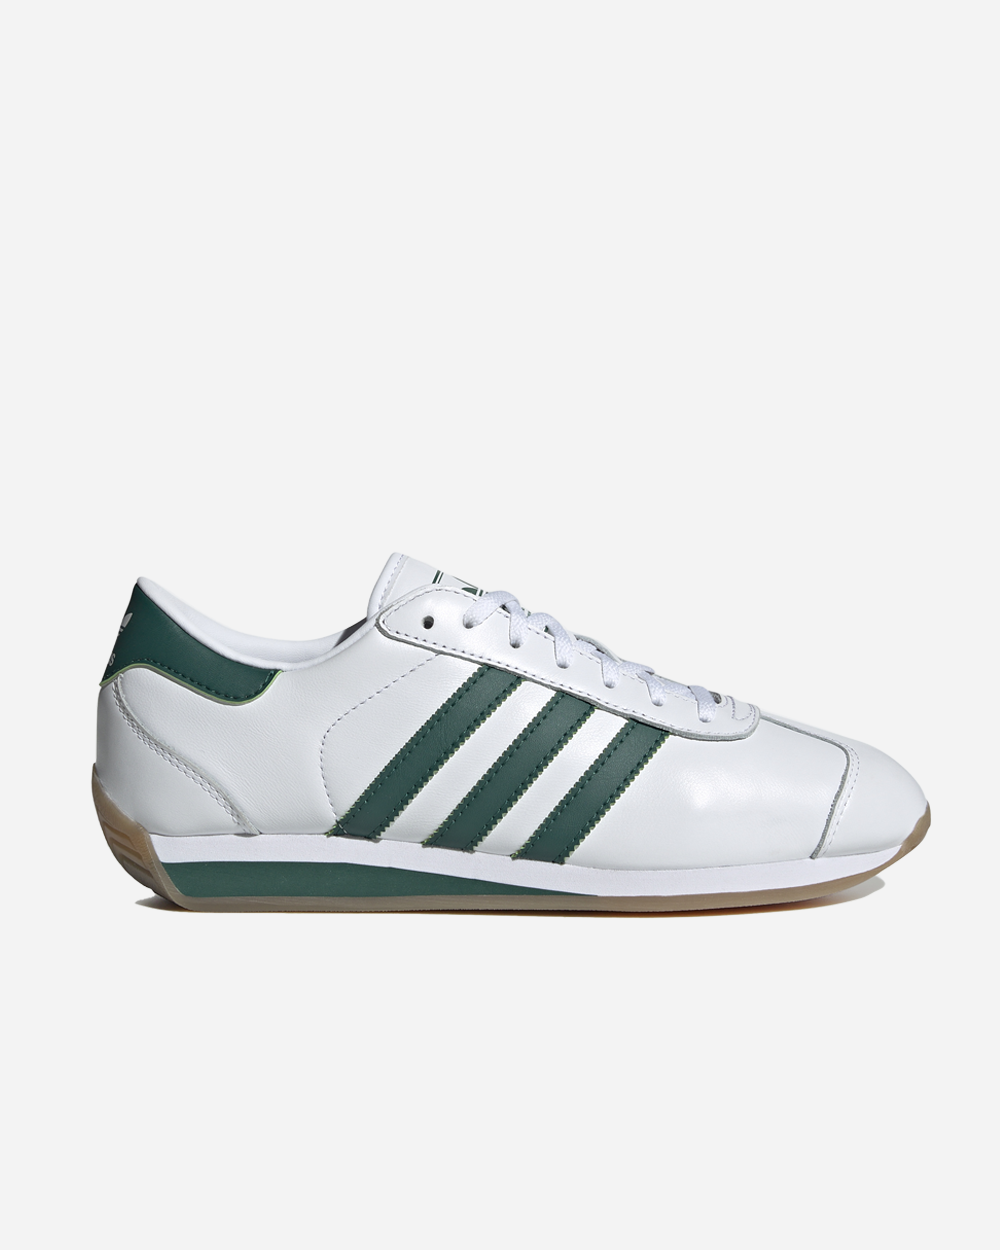 Adidas Country Ii White/Green IG4551